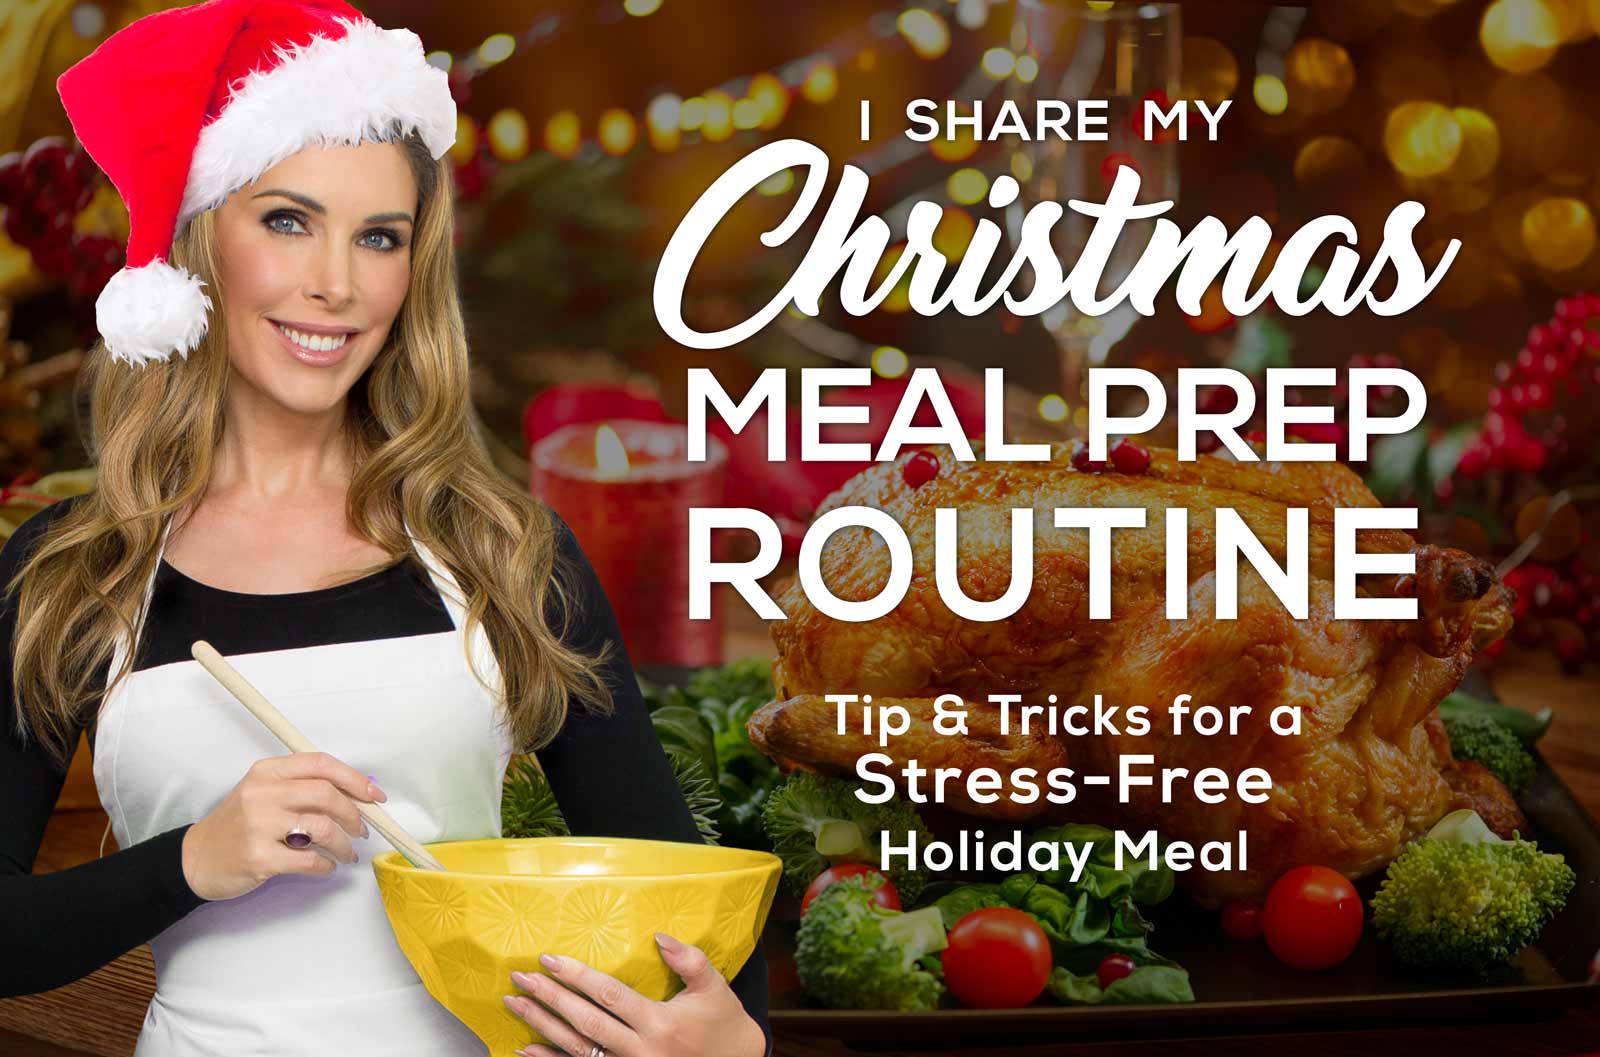 My Christmas Meal Prep Routine: Guilt-Free & Delicious! - Nutracelle